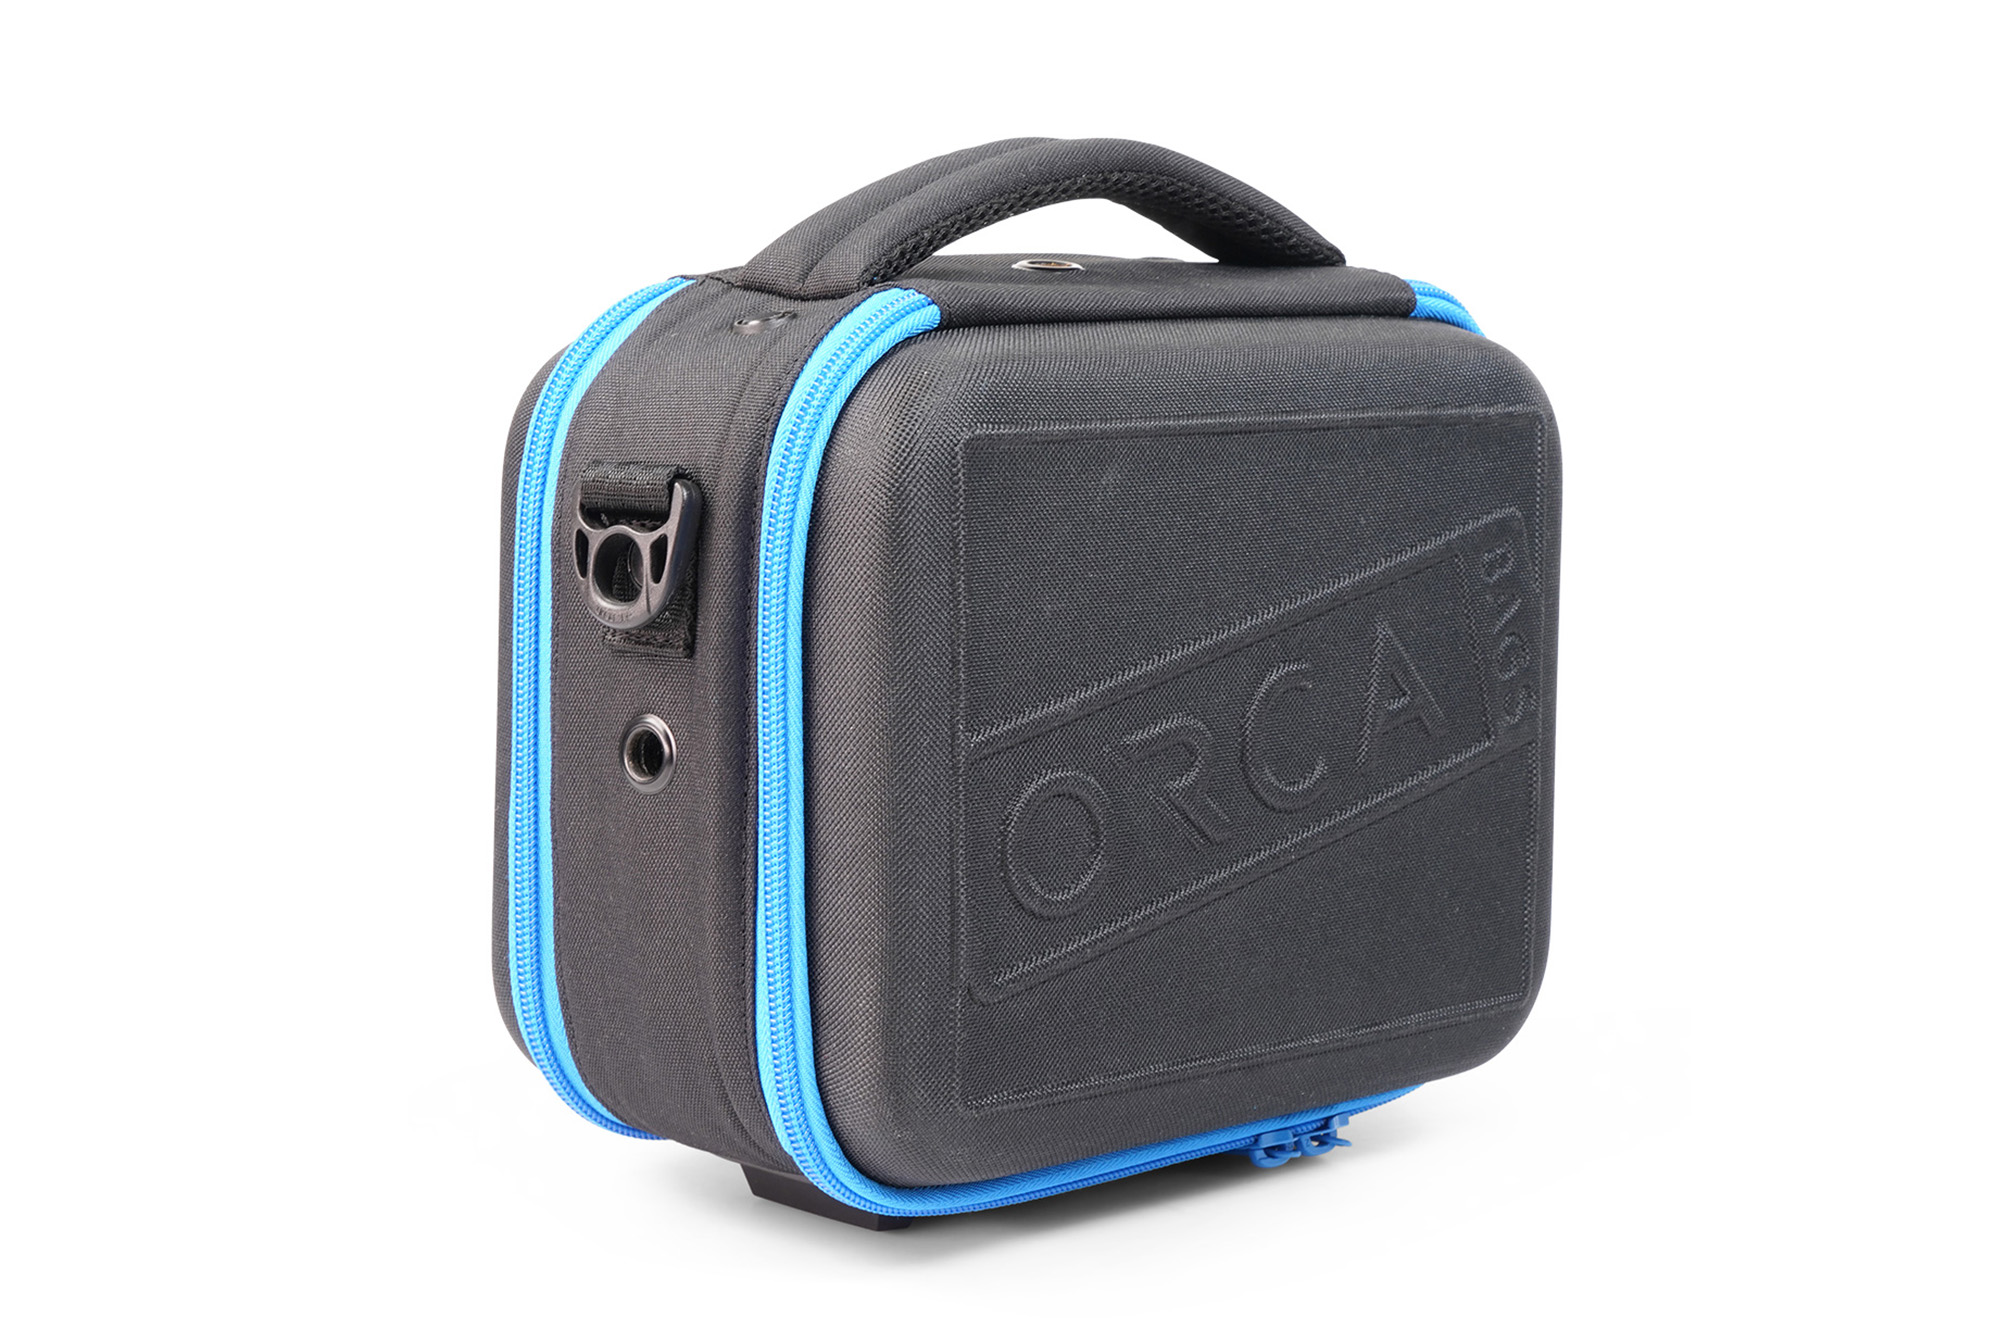 OR-142 Orca Hard Shell Case for 7" monitors